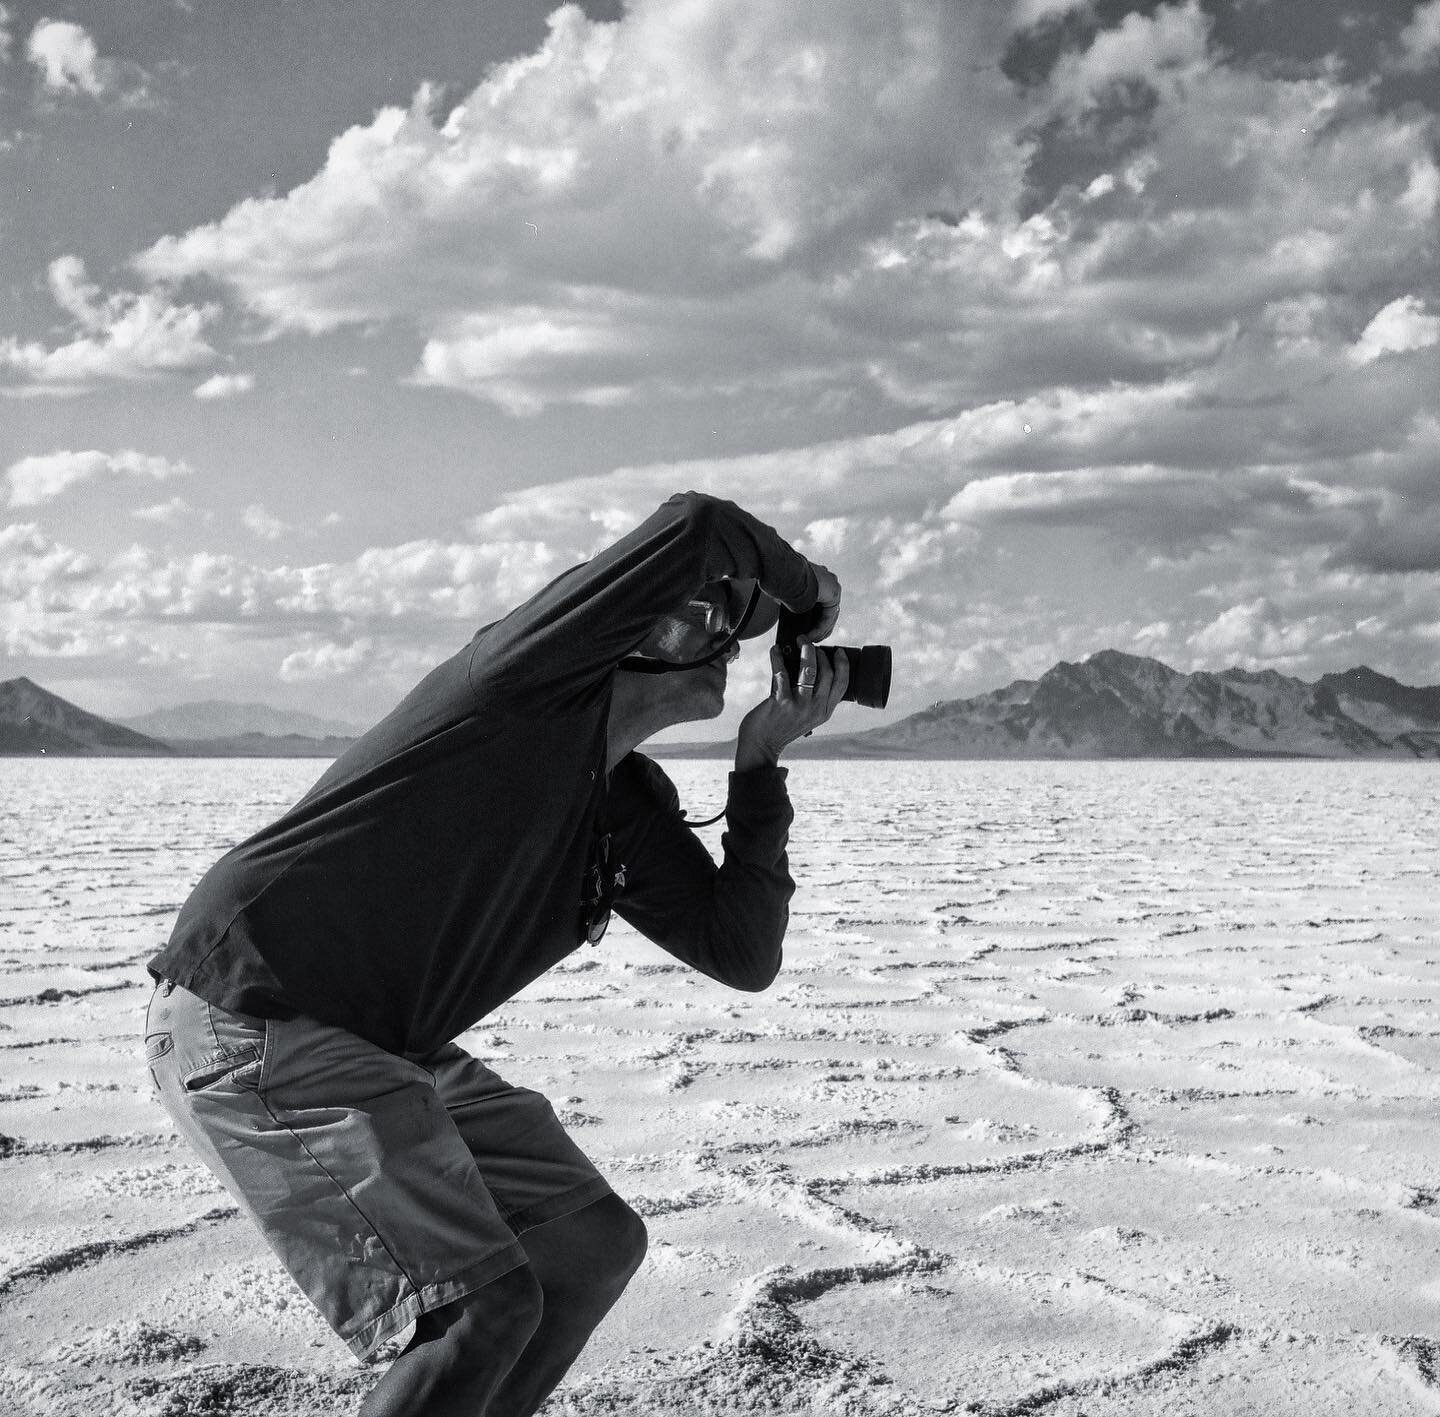 A photograph of Y. T. during a photoshoot at Bonnevill Salt Flats earlier this year, taken by the multi-talented and artistic hippy @sandstonelotus  You have such a great eye for composition , Tina!  You always seem to capture such beauty in your art